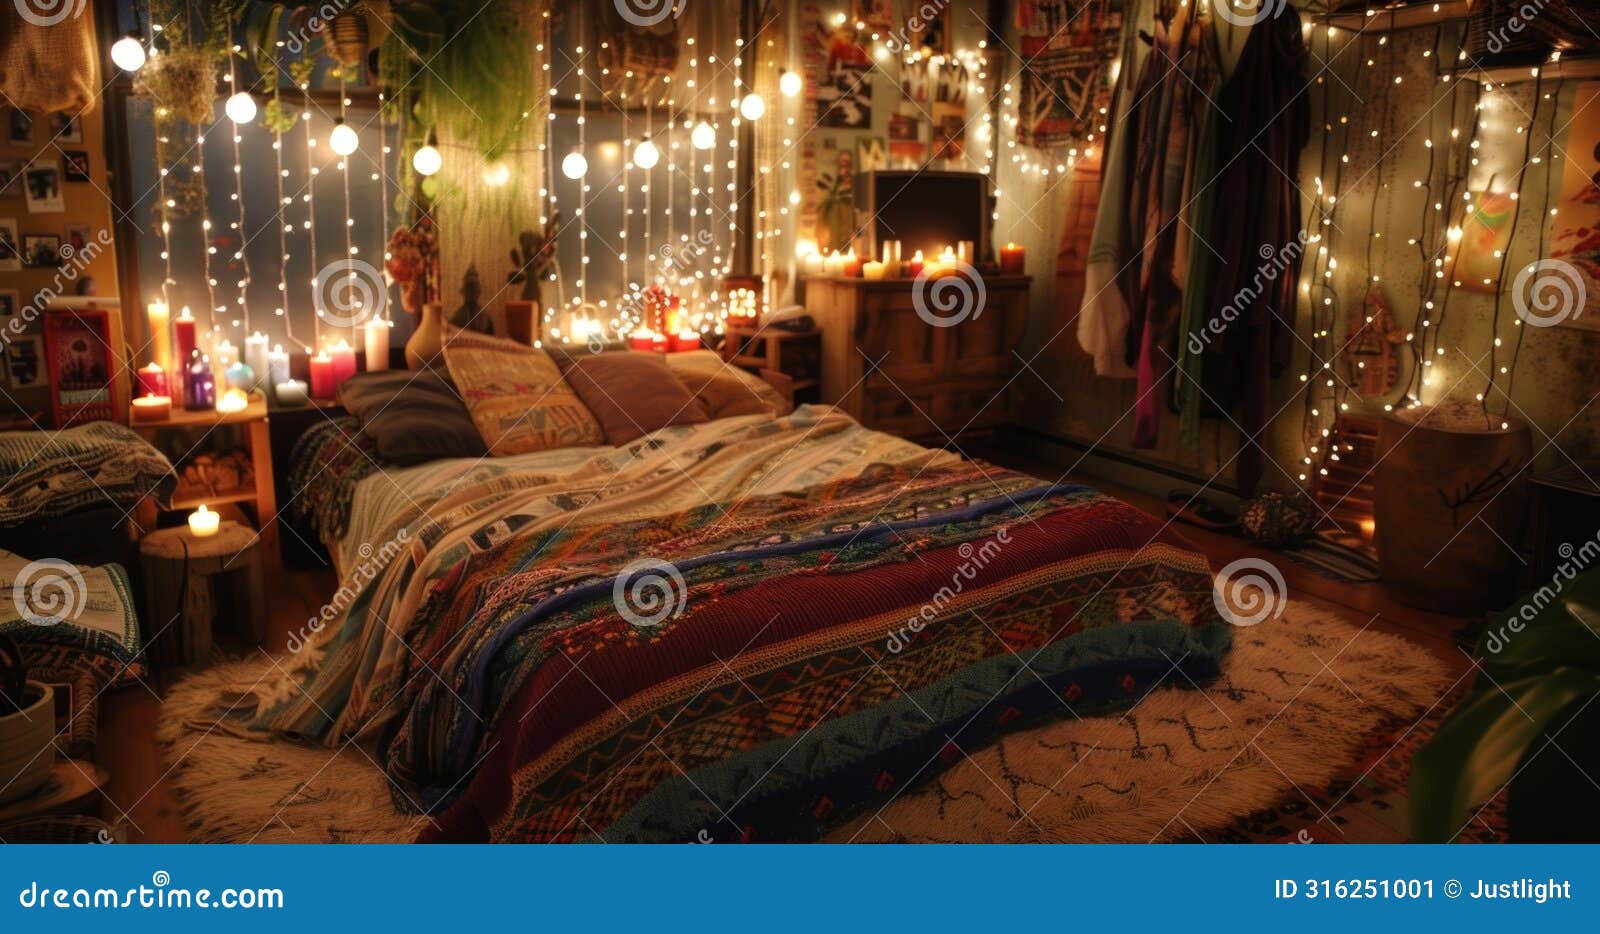 a romantic bohemian bedroom with colorful blankets and dozens of hanging candles creating a warm and inviting atmosphere